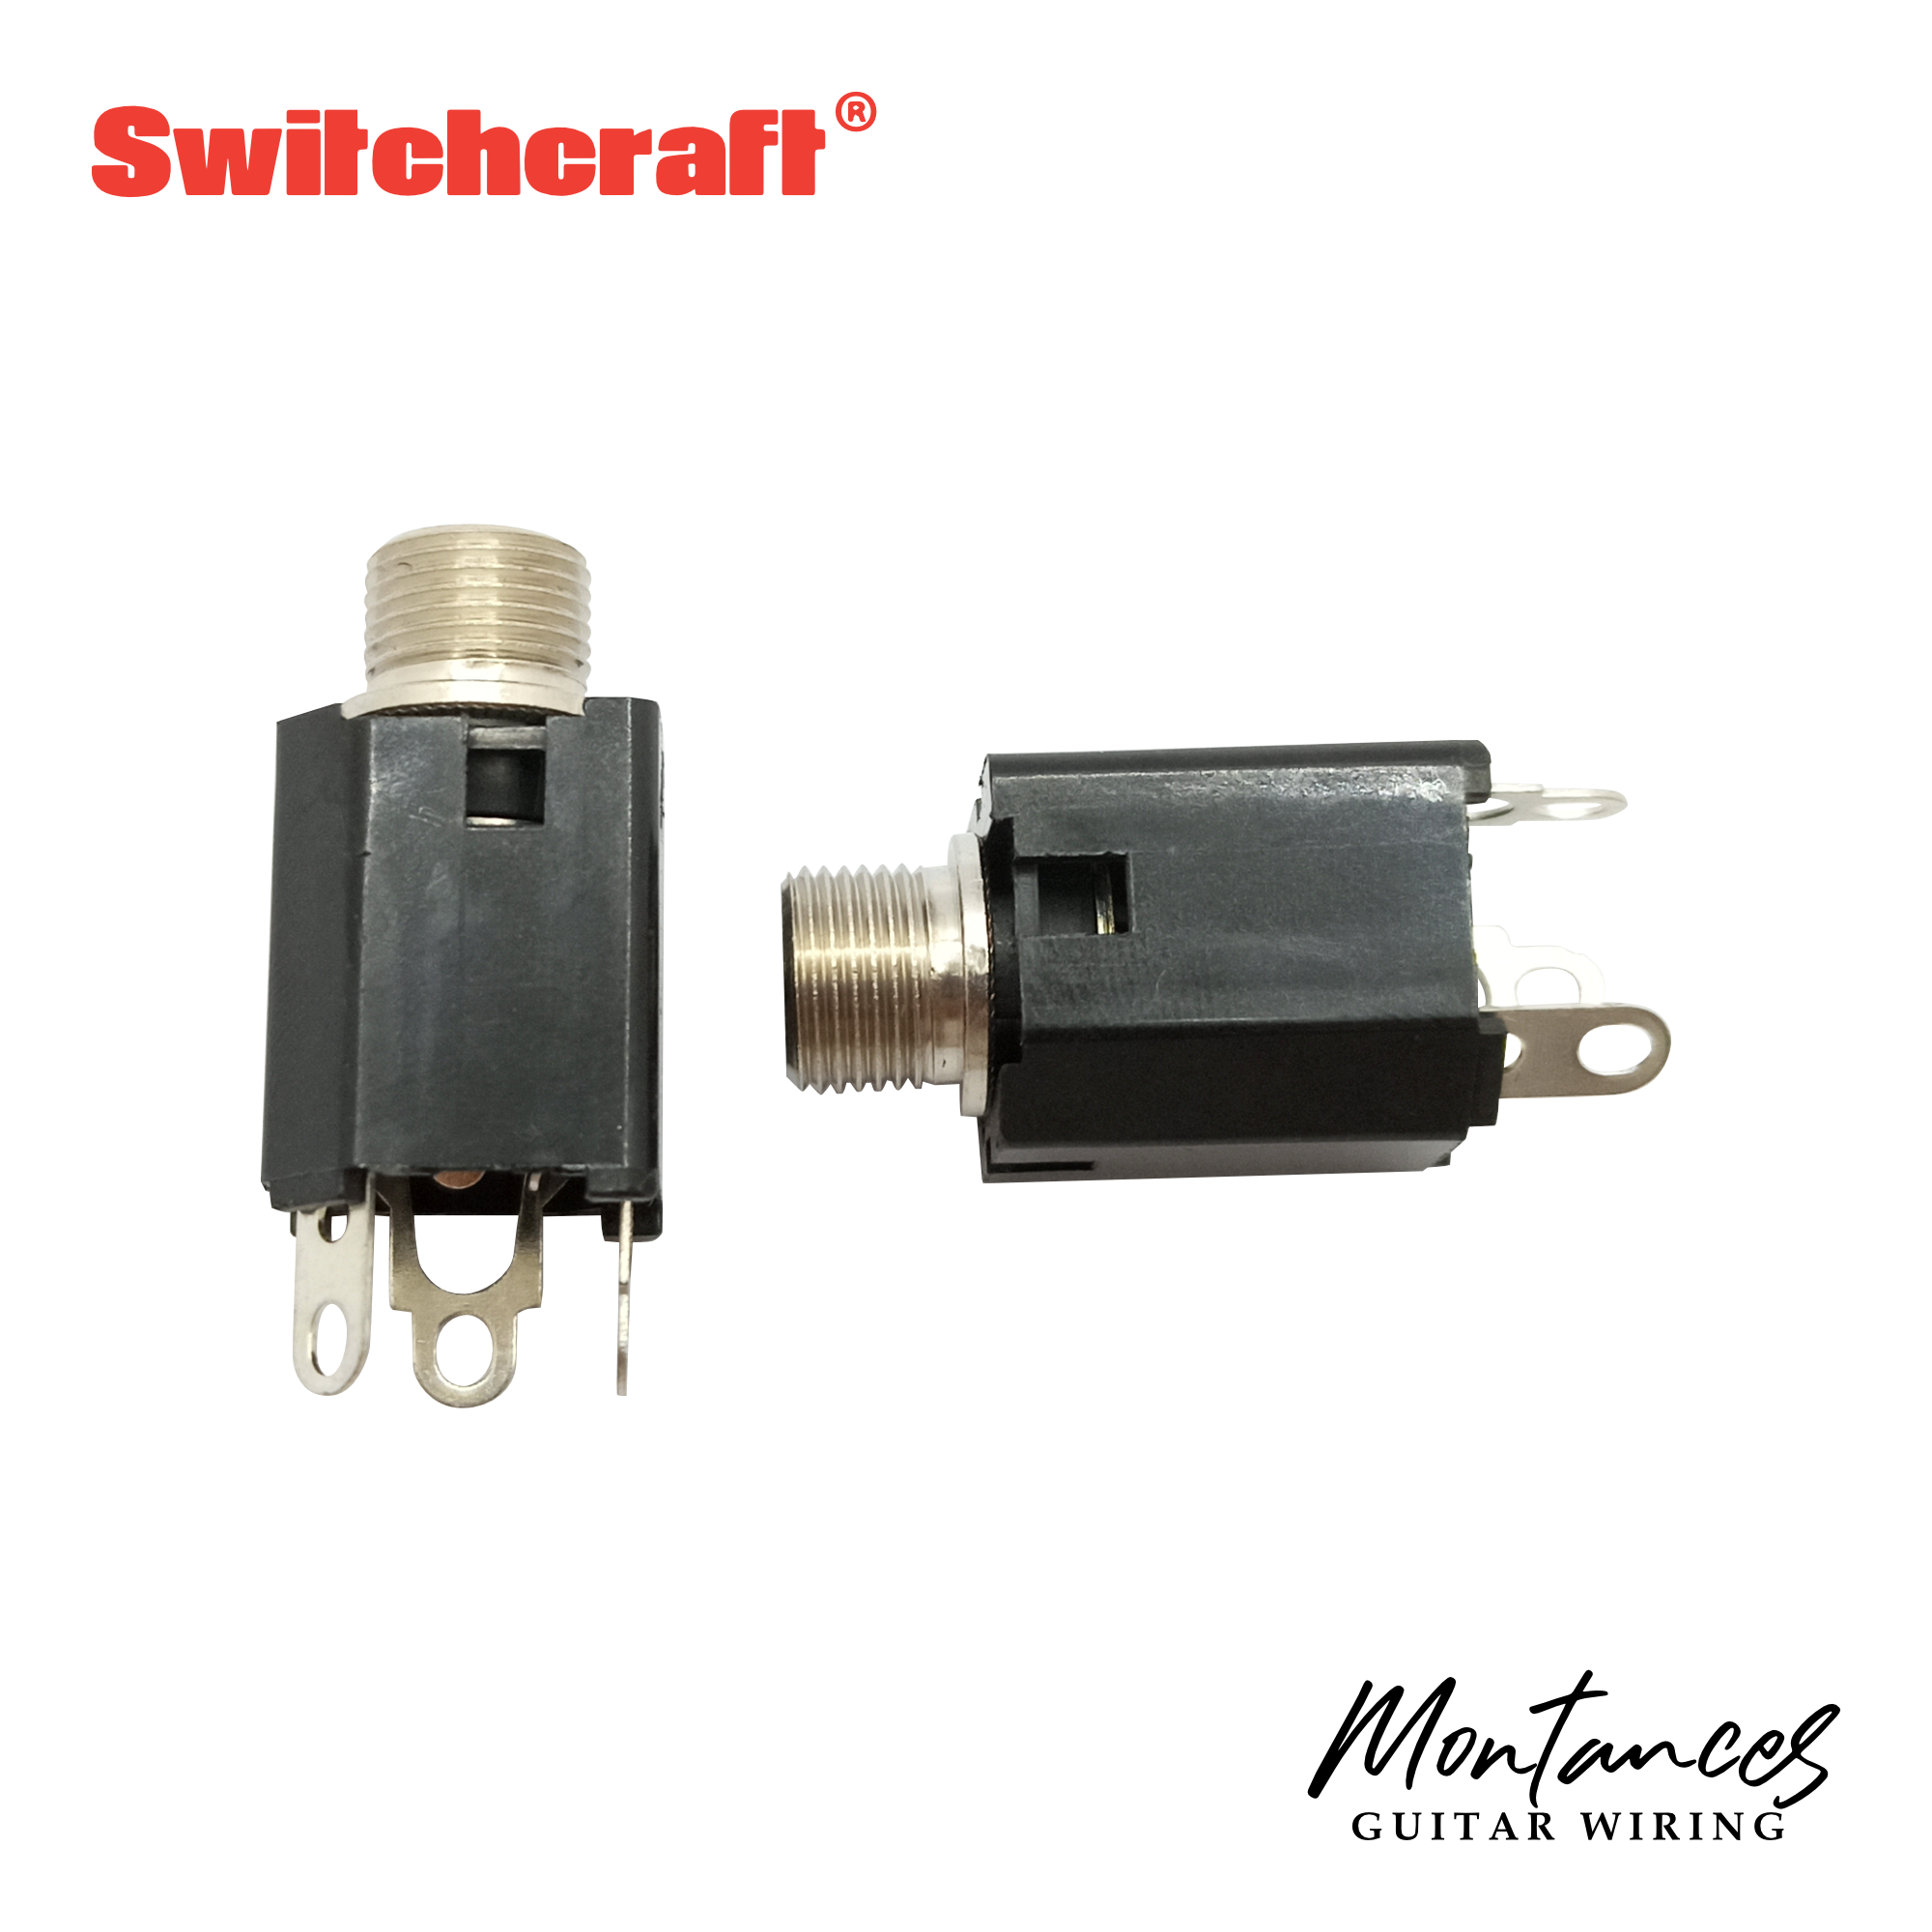 Switchcraft® Output Jack Made in USA (Enclosed Jack)